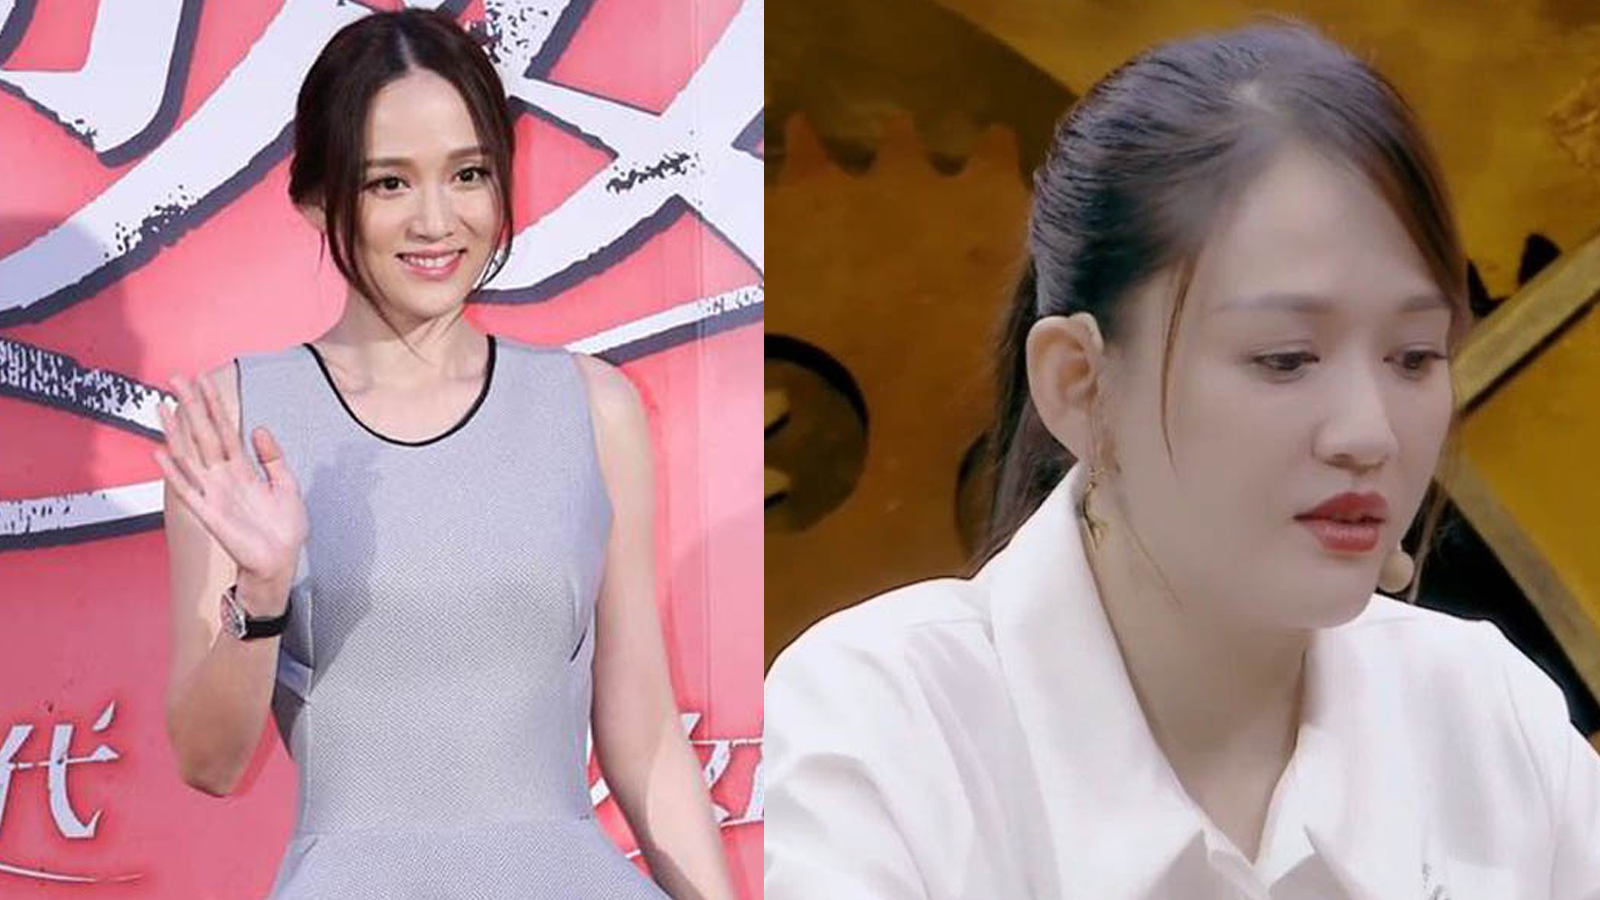 Joe Chen Slammed For 'Looking Auntie' After Finding Love - 8Days